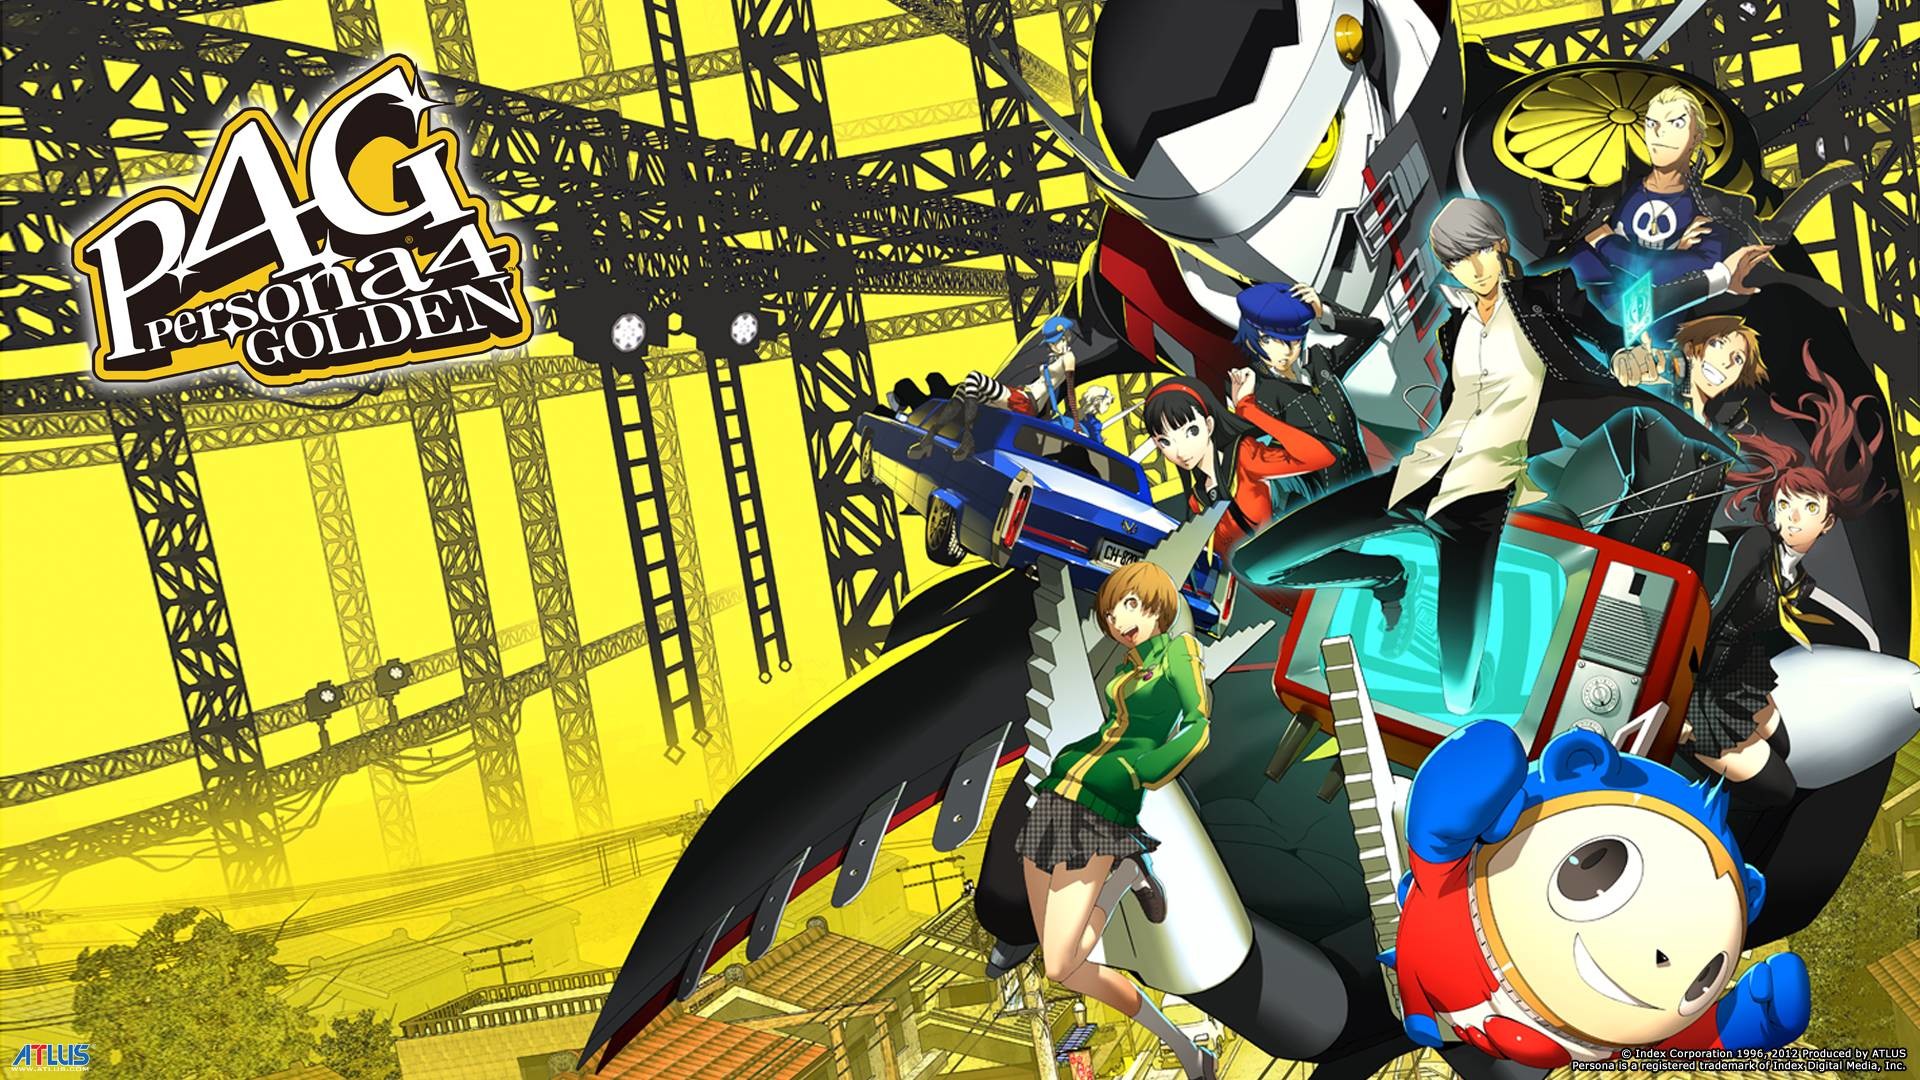 1920x1080 Wallpapers For > Persona 4 Golden Wallpaper Hd